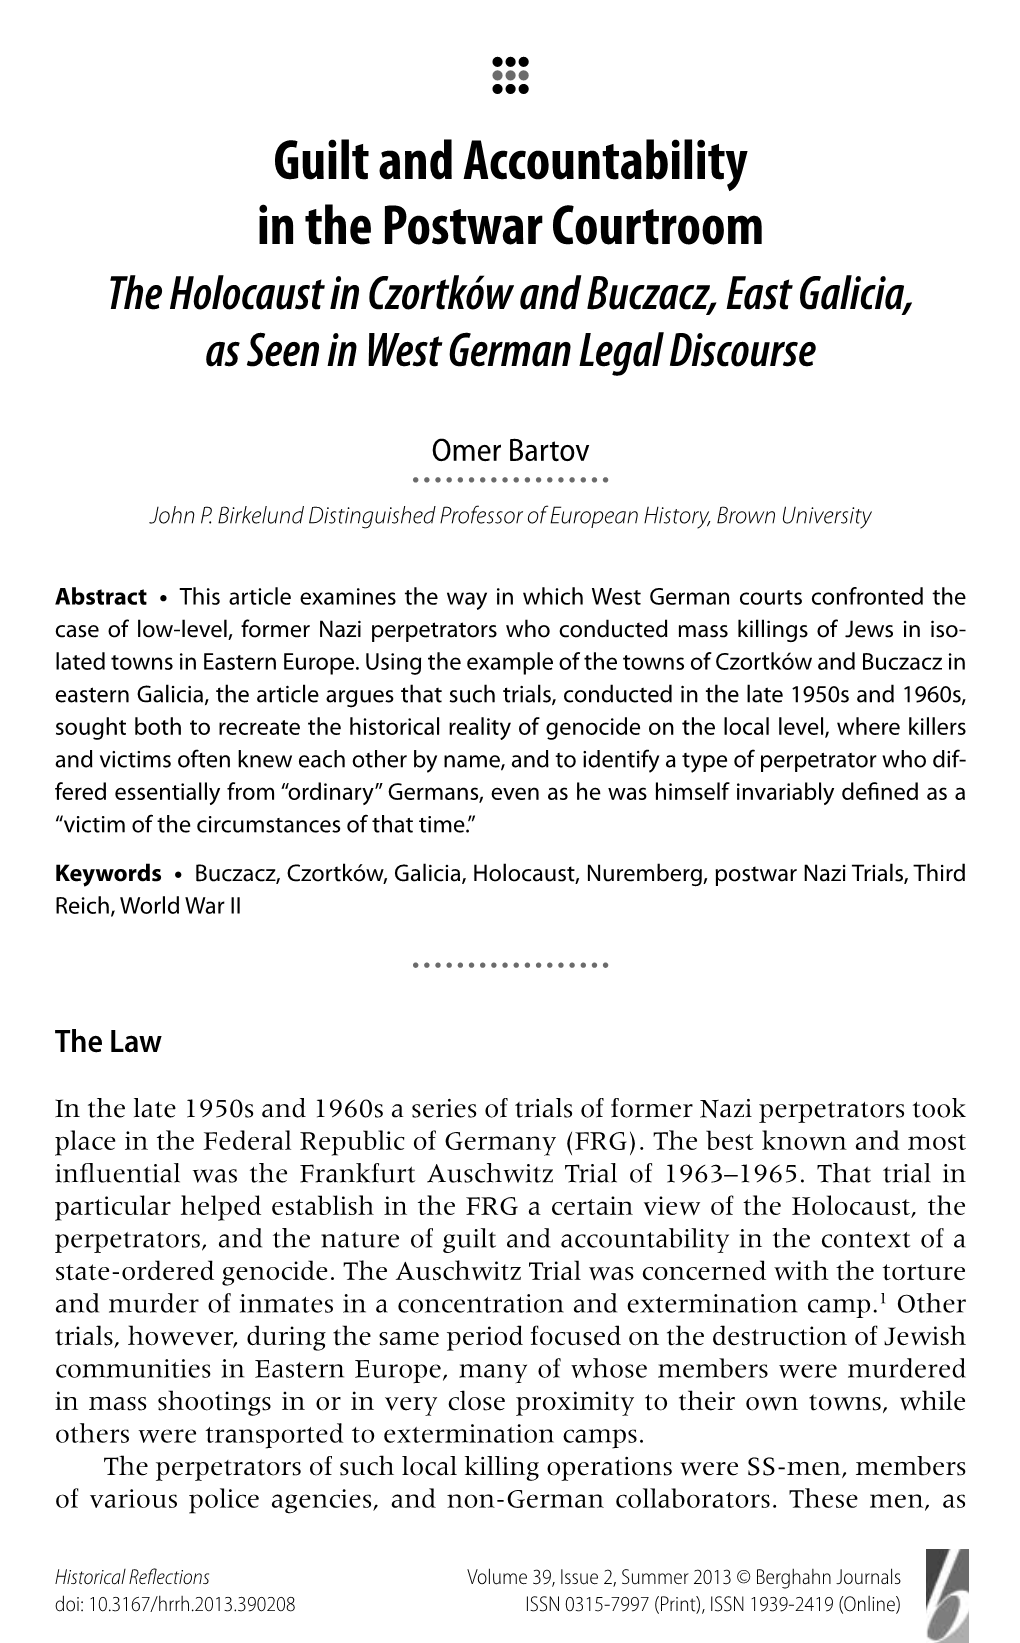 Guilt and Accountability in the Postwar Courtroom the Holocaust in Czortków and Buczacz, East Galicia, As Seen in West German Legal Discourse